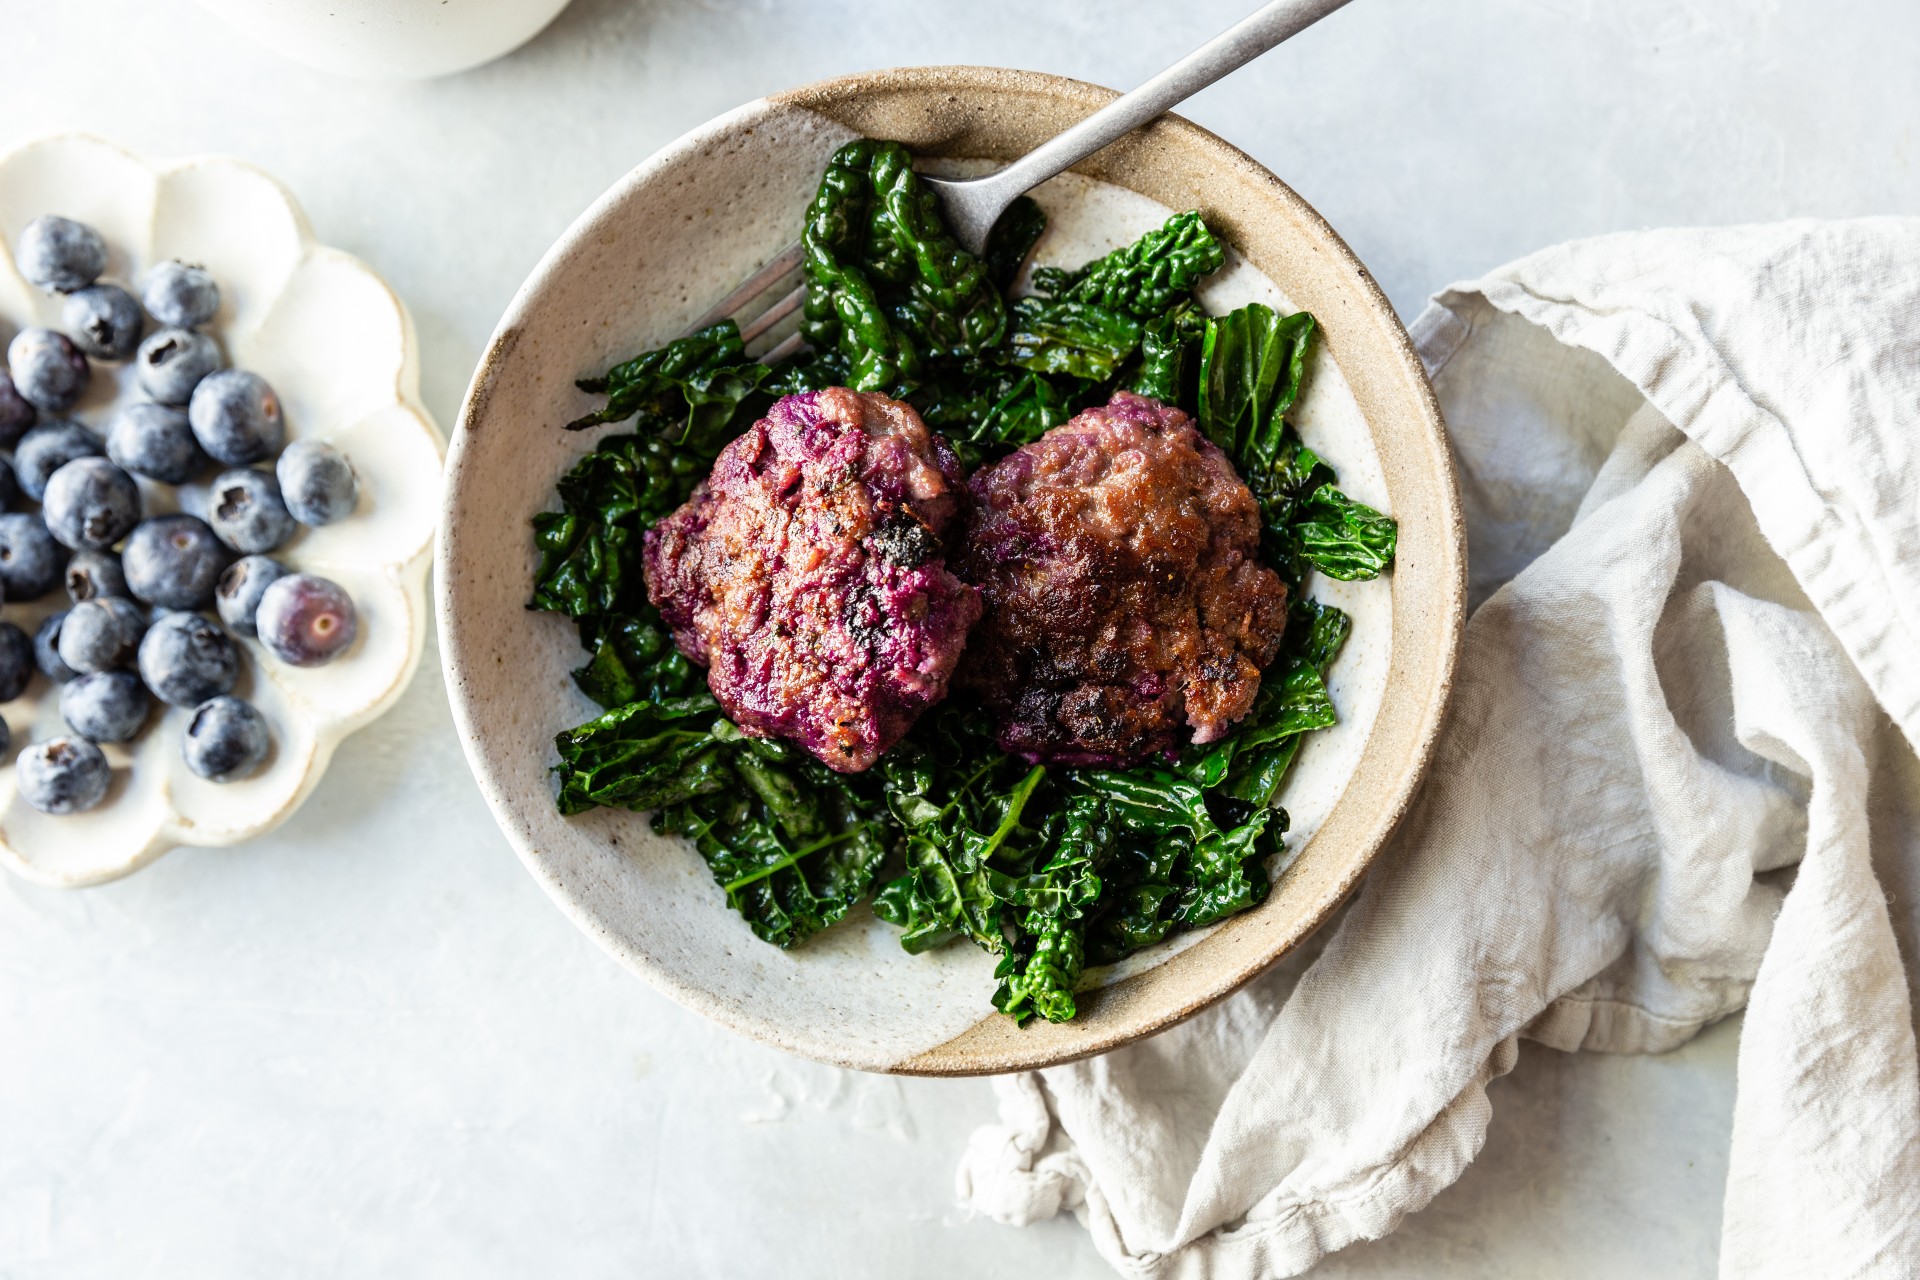 image of blueberry breakfast sausage patties on a bed of kale in a bowl with a fork.